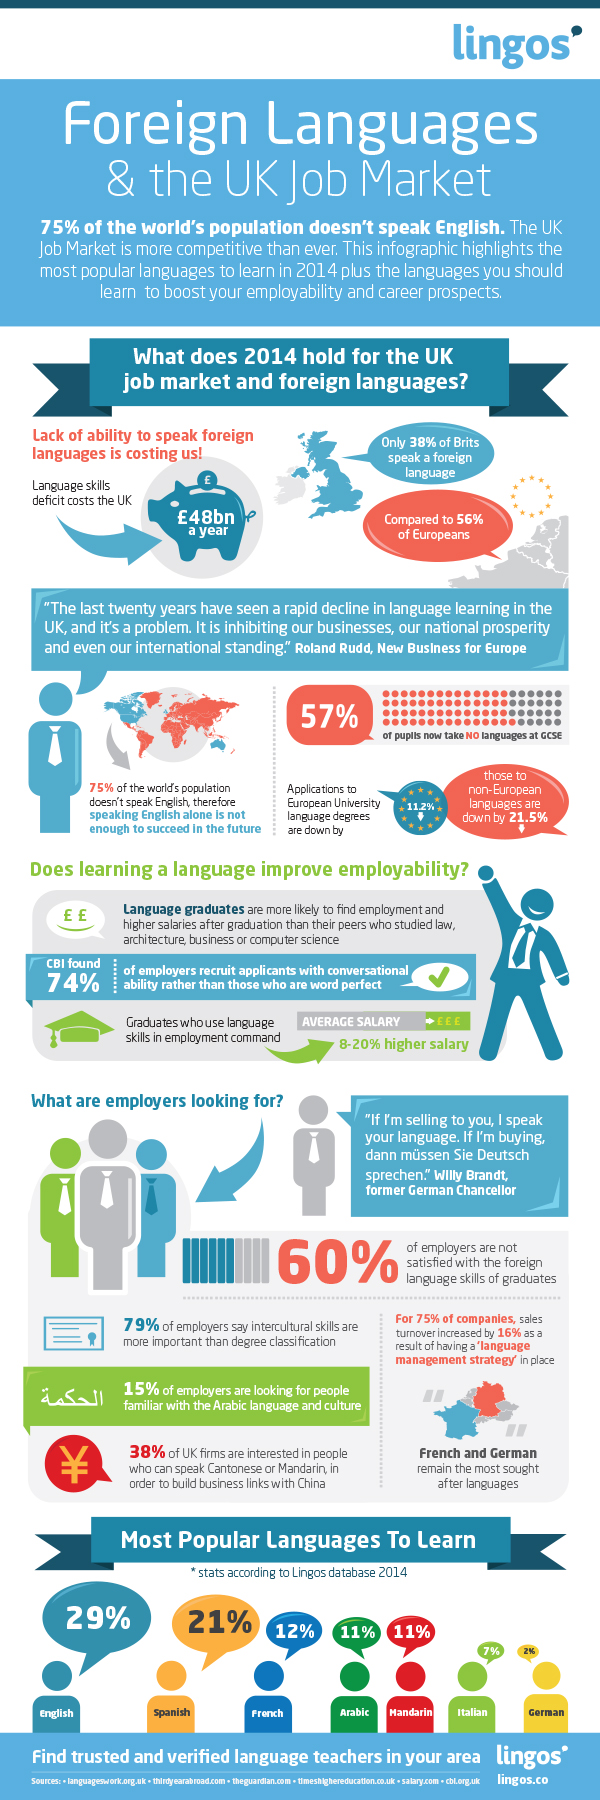 Foreign Languages and the UK Job Market